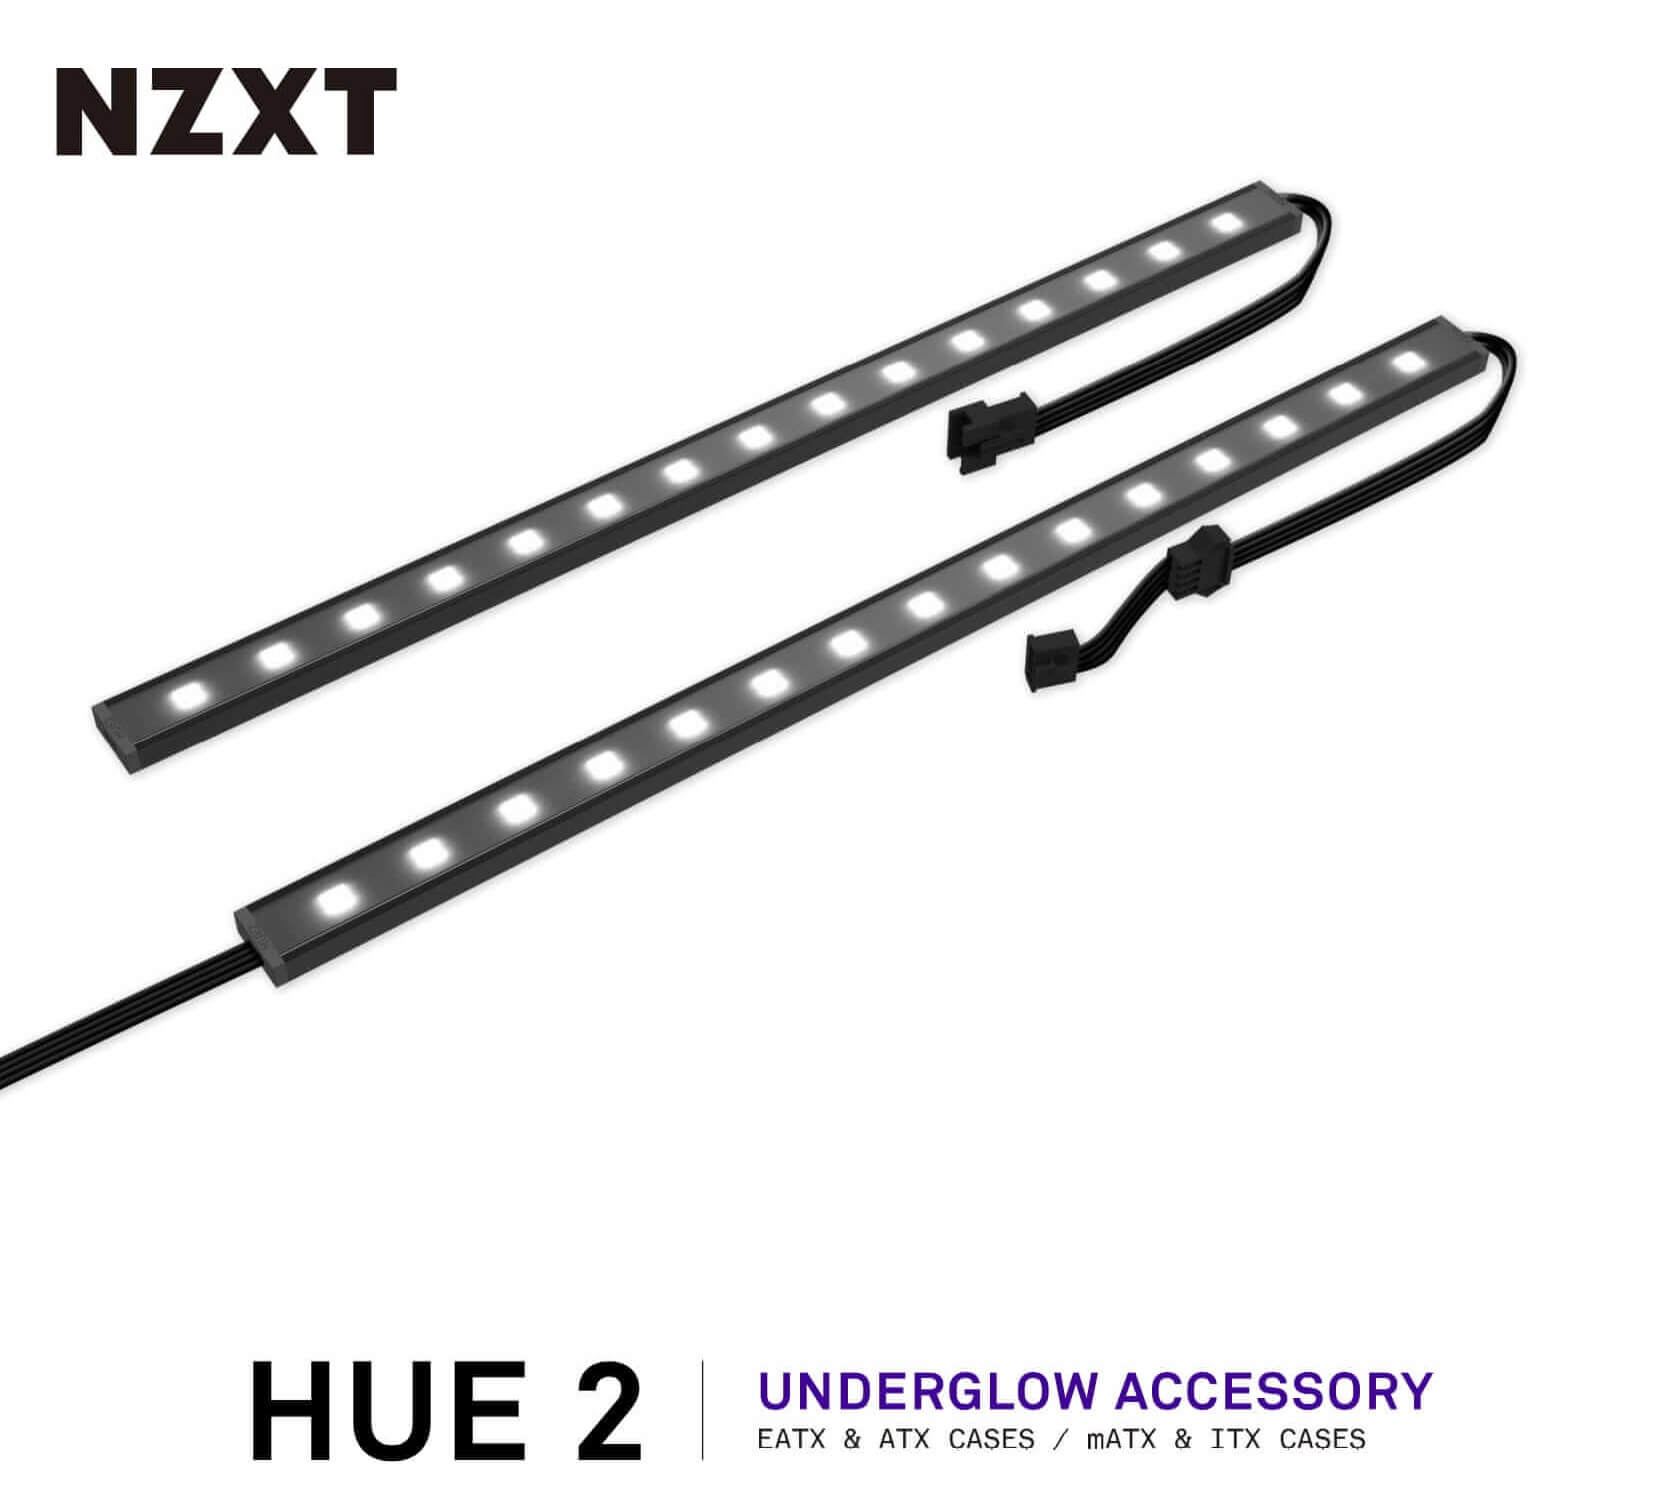 Underglow Lighting NZXT HUE 2 RGB 300mm For EATX & ATX Cases AH-2UGKK-A1 image